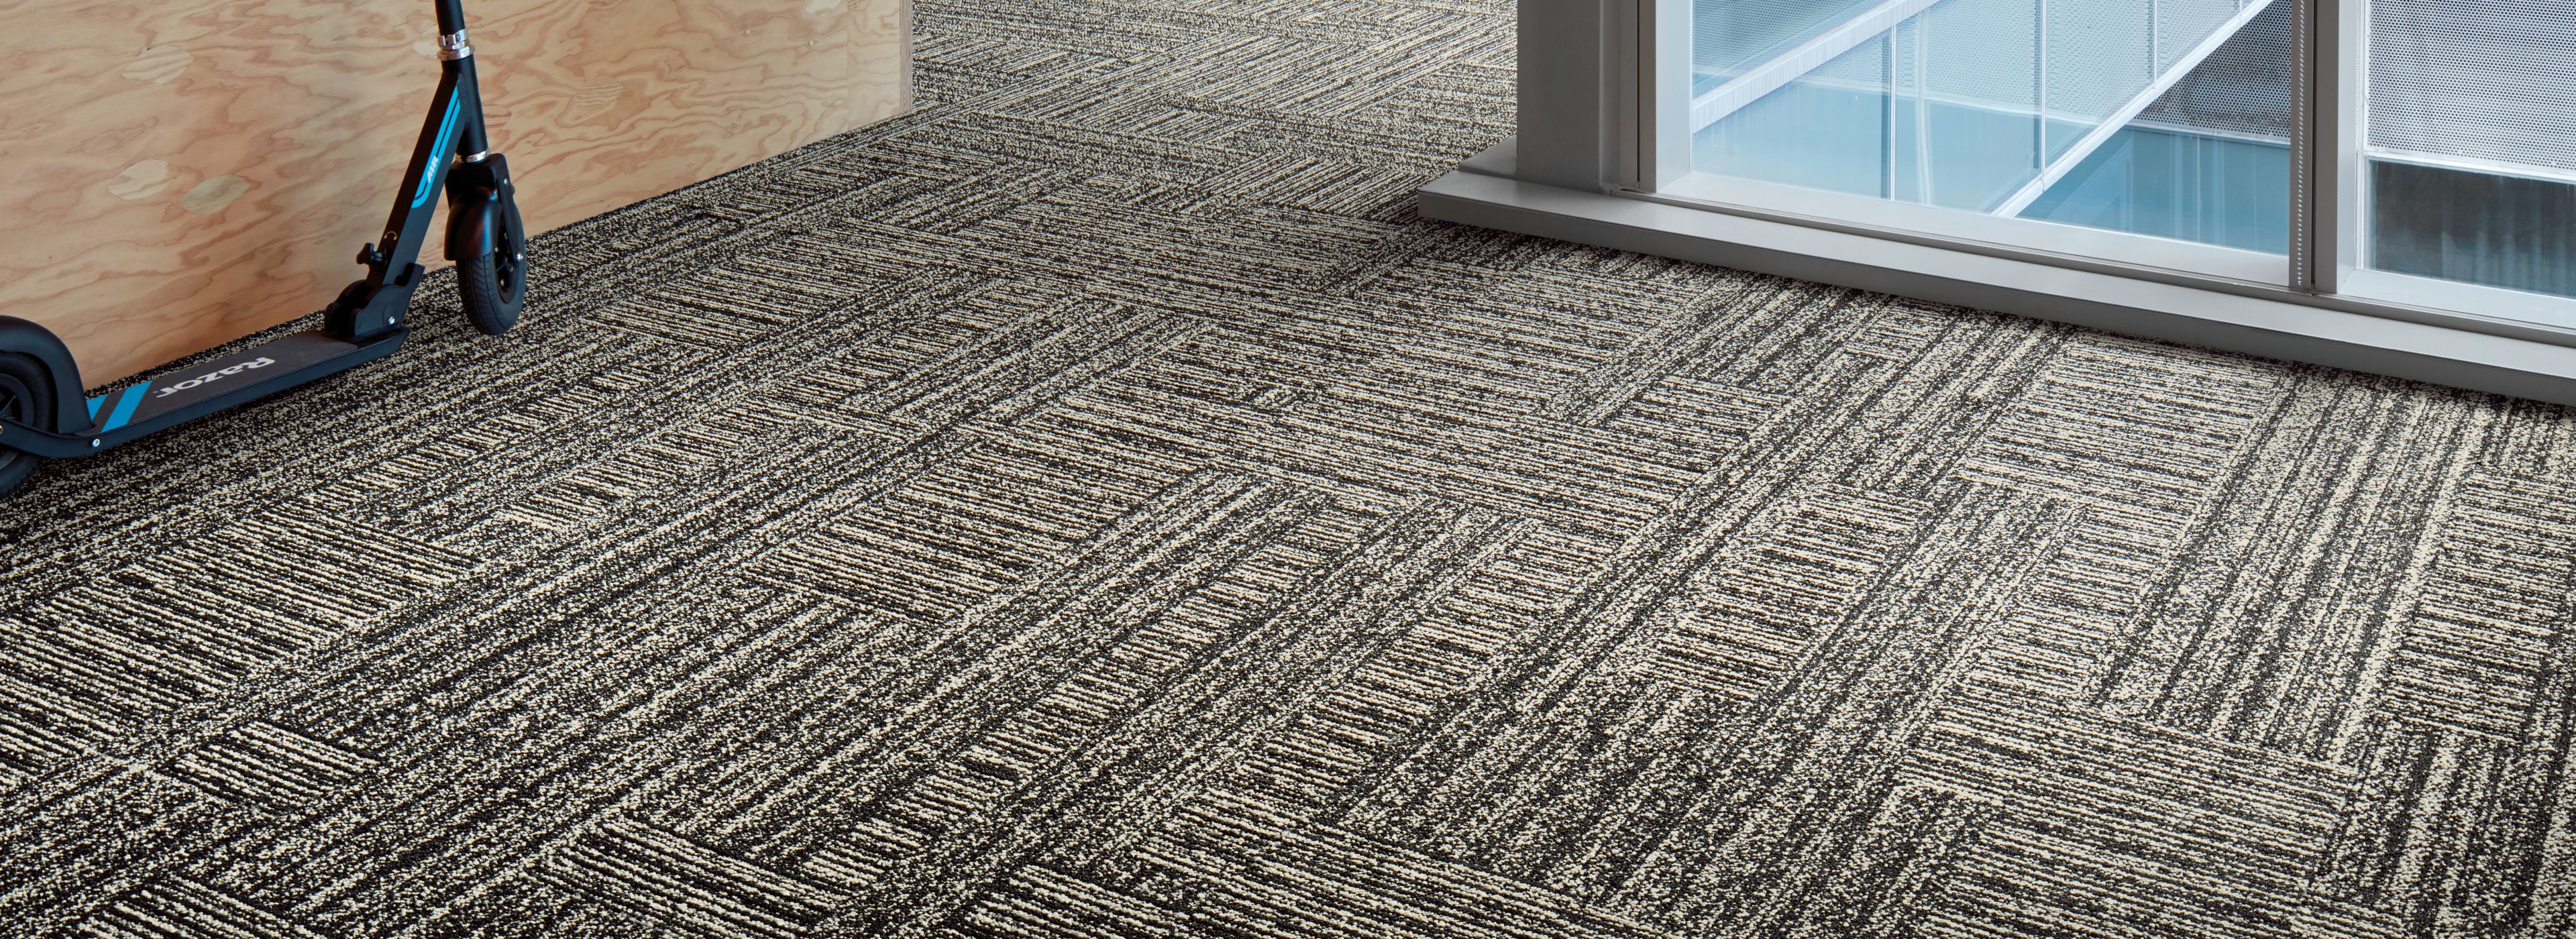 Interface Decibel and Hard Drive plank carpet tile in small area with glass windows afbeeldingnummer 1